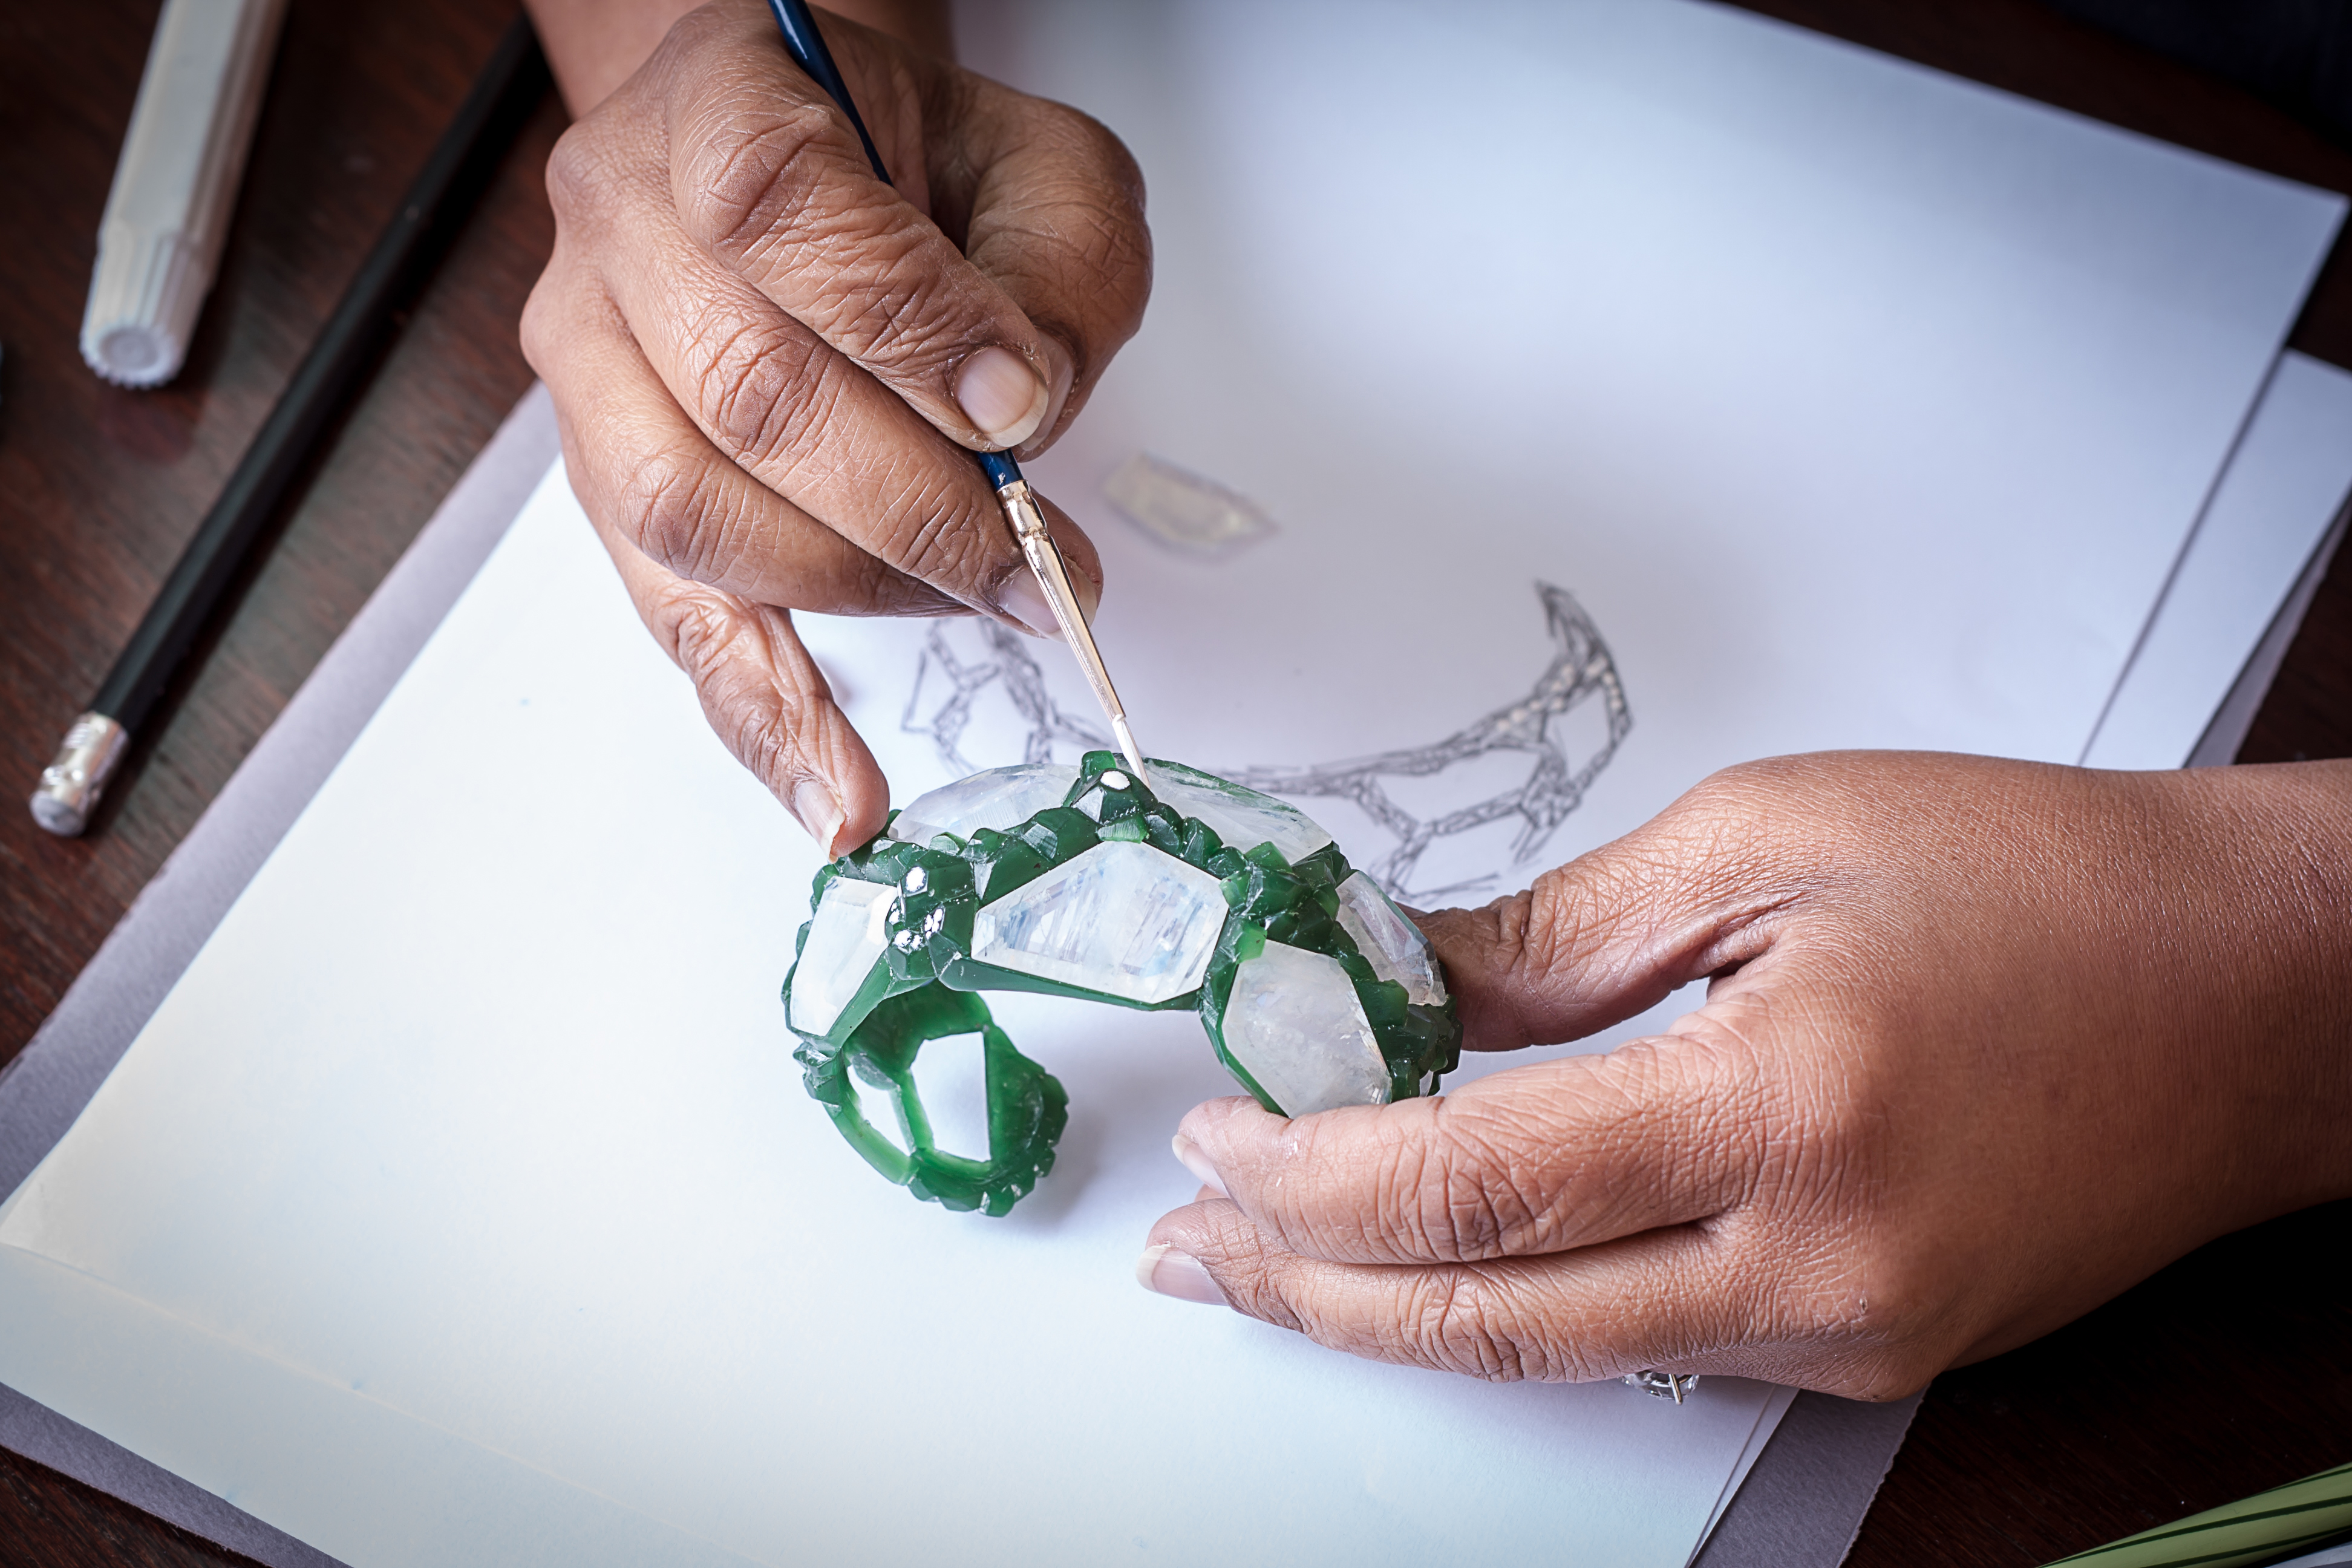 Neha Dani working on the 'Aialik' cuff from the 'Glacier' collection wax model